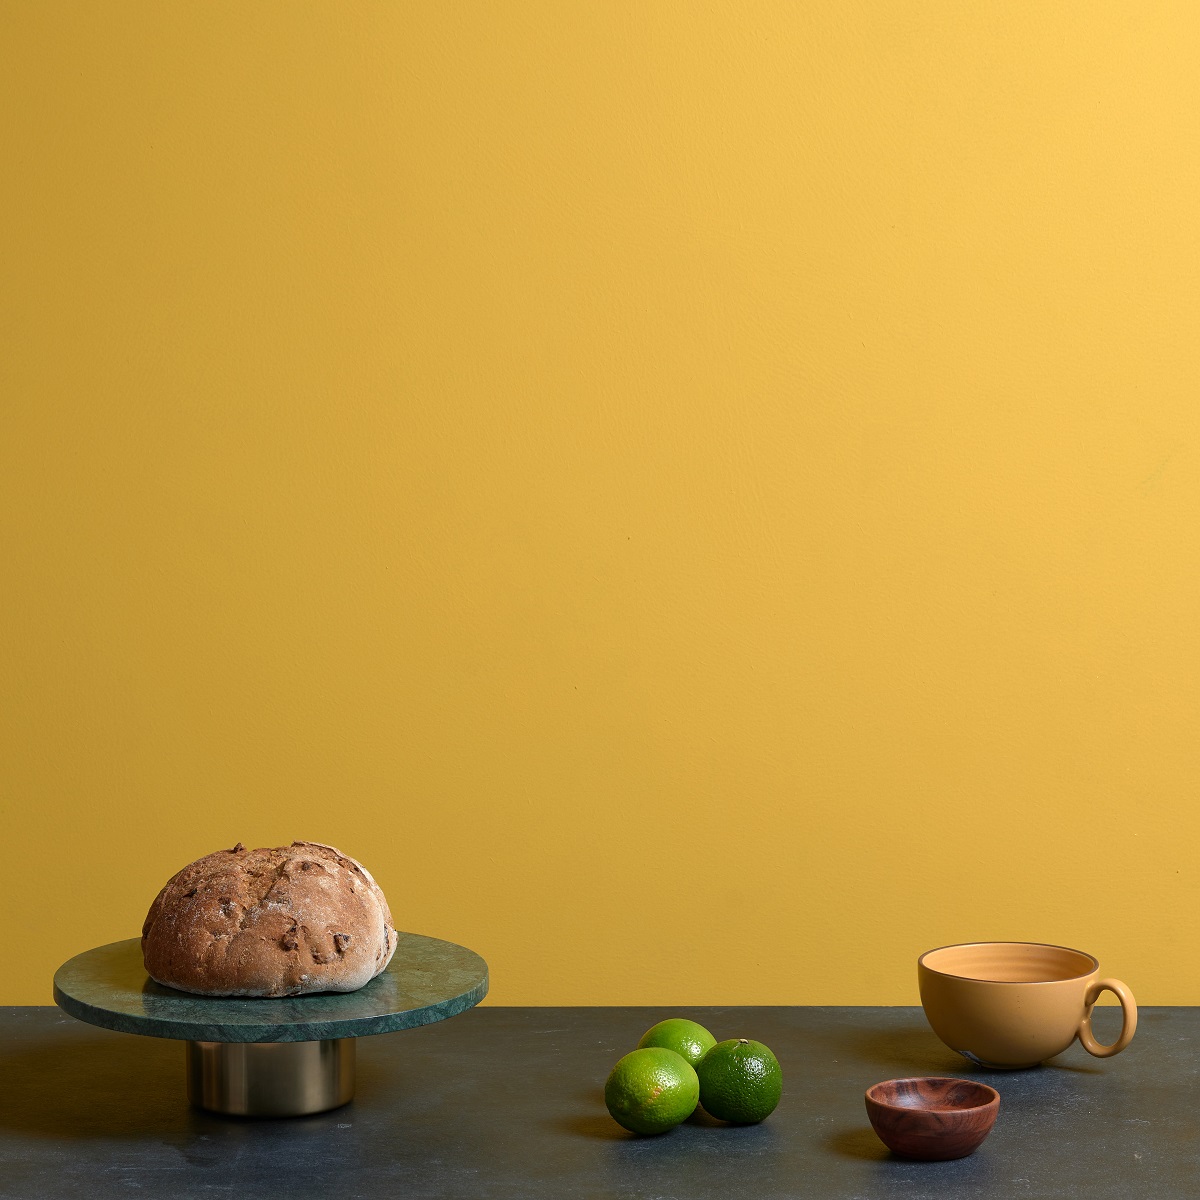 still life of bread and cup on a table with wall behind painted in Ottos Gold from hyperion tiles